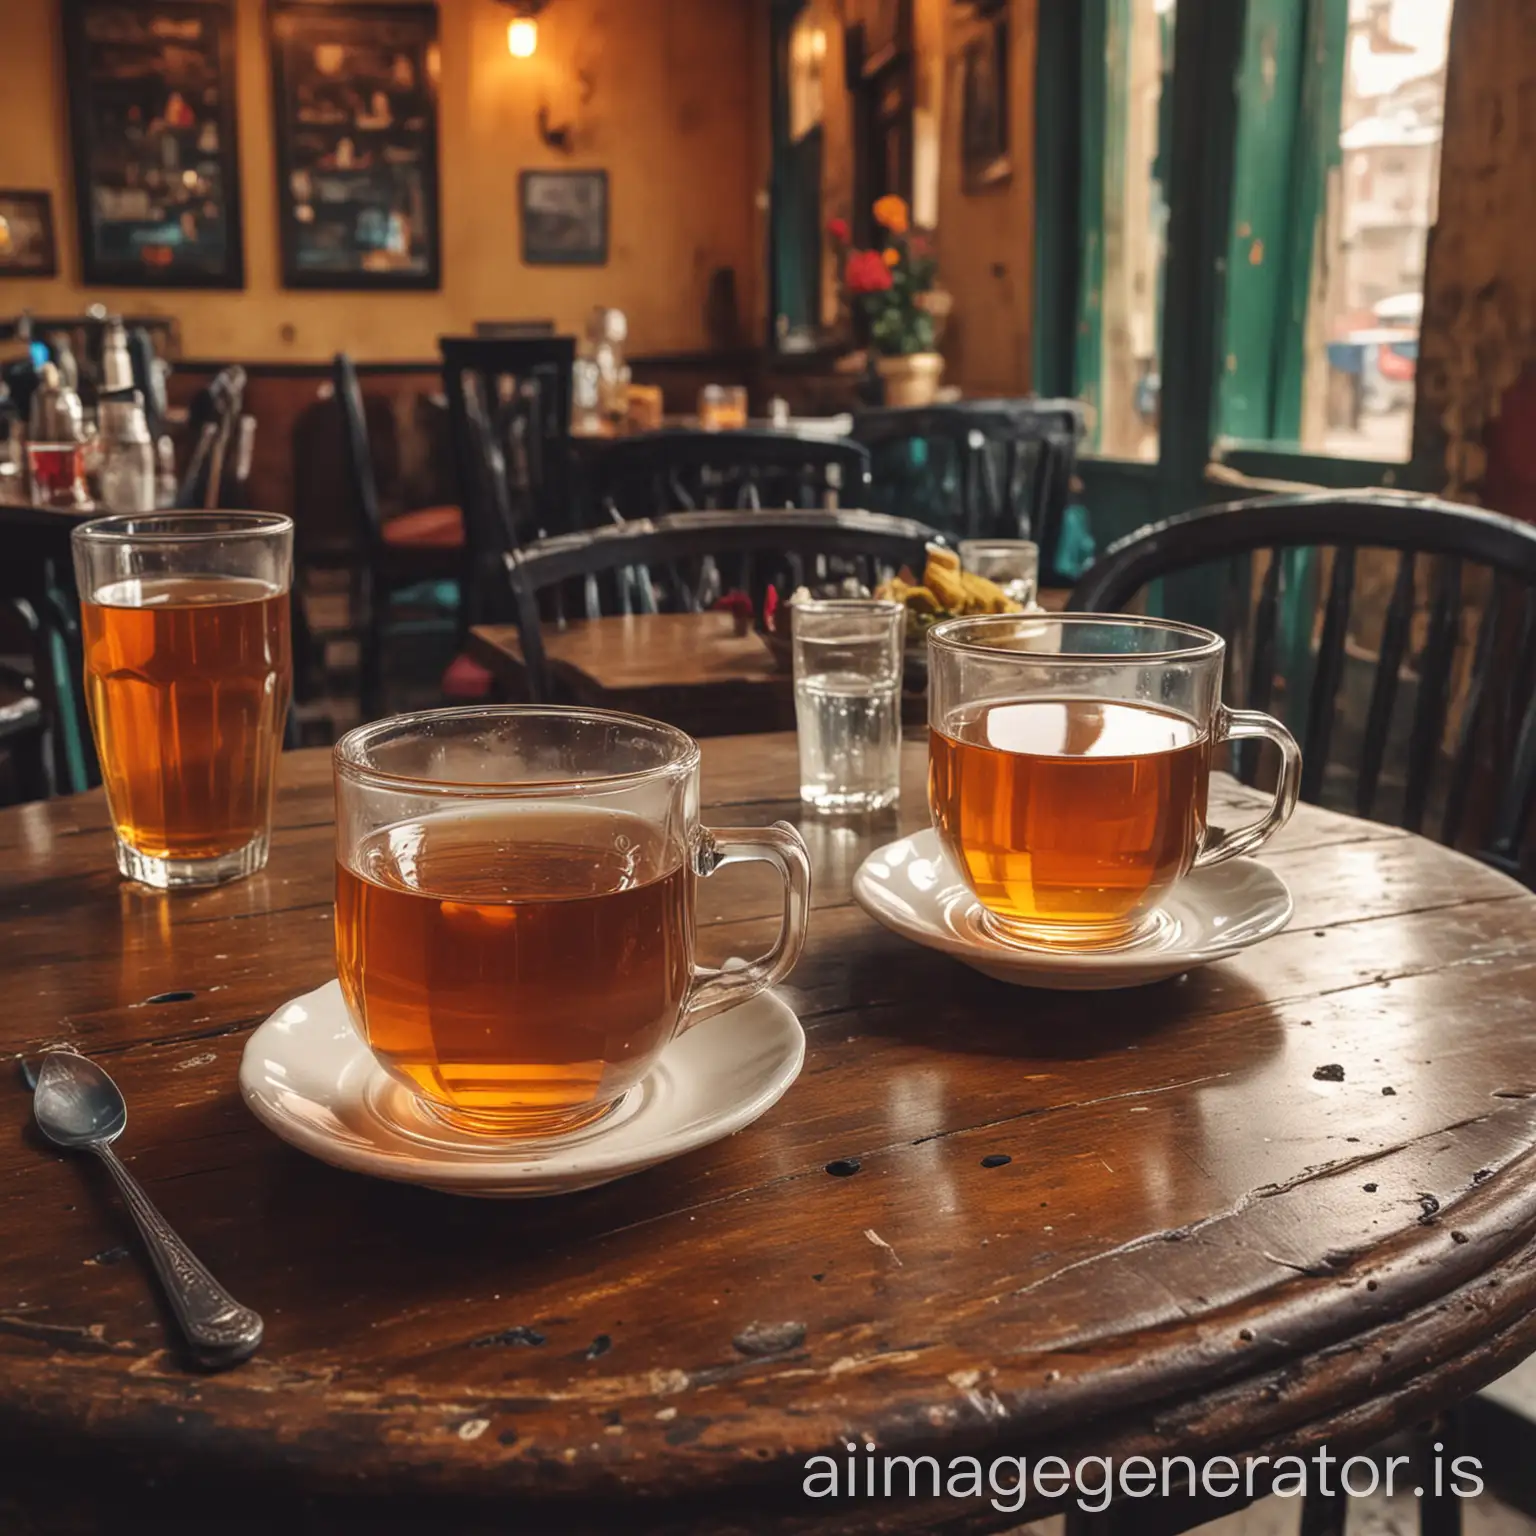 Vintage-Setting-Two-Glasses-of-Tea-on-an-Antique-Table-in-an-Authentic-Indian-Restaurant